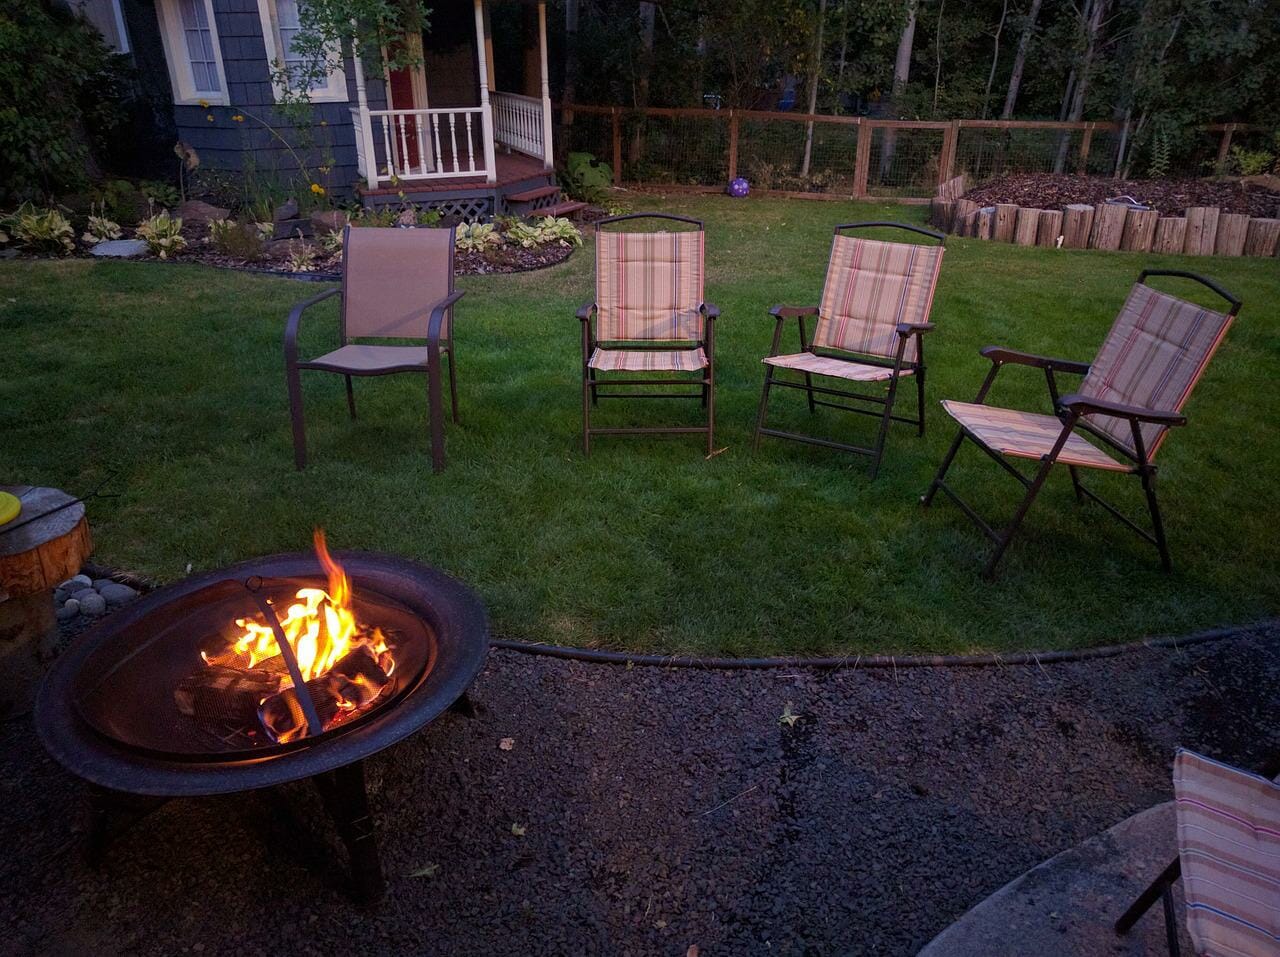 How Far Away From a House Should a Fire Pit be Place?